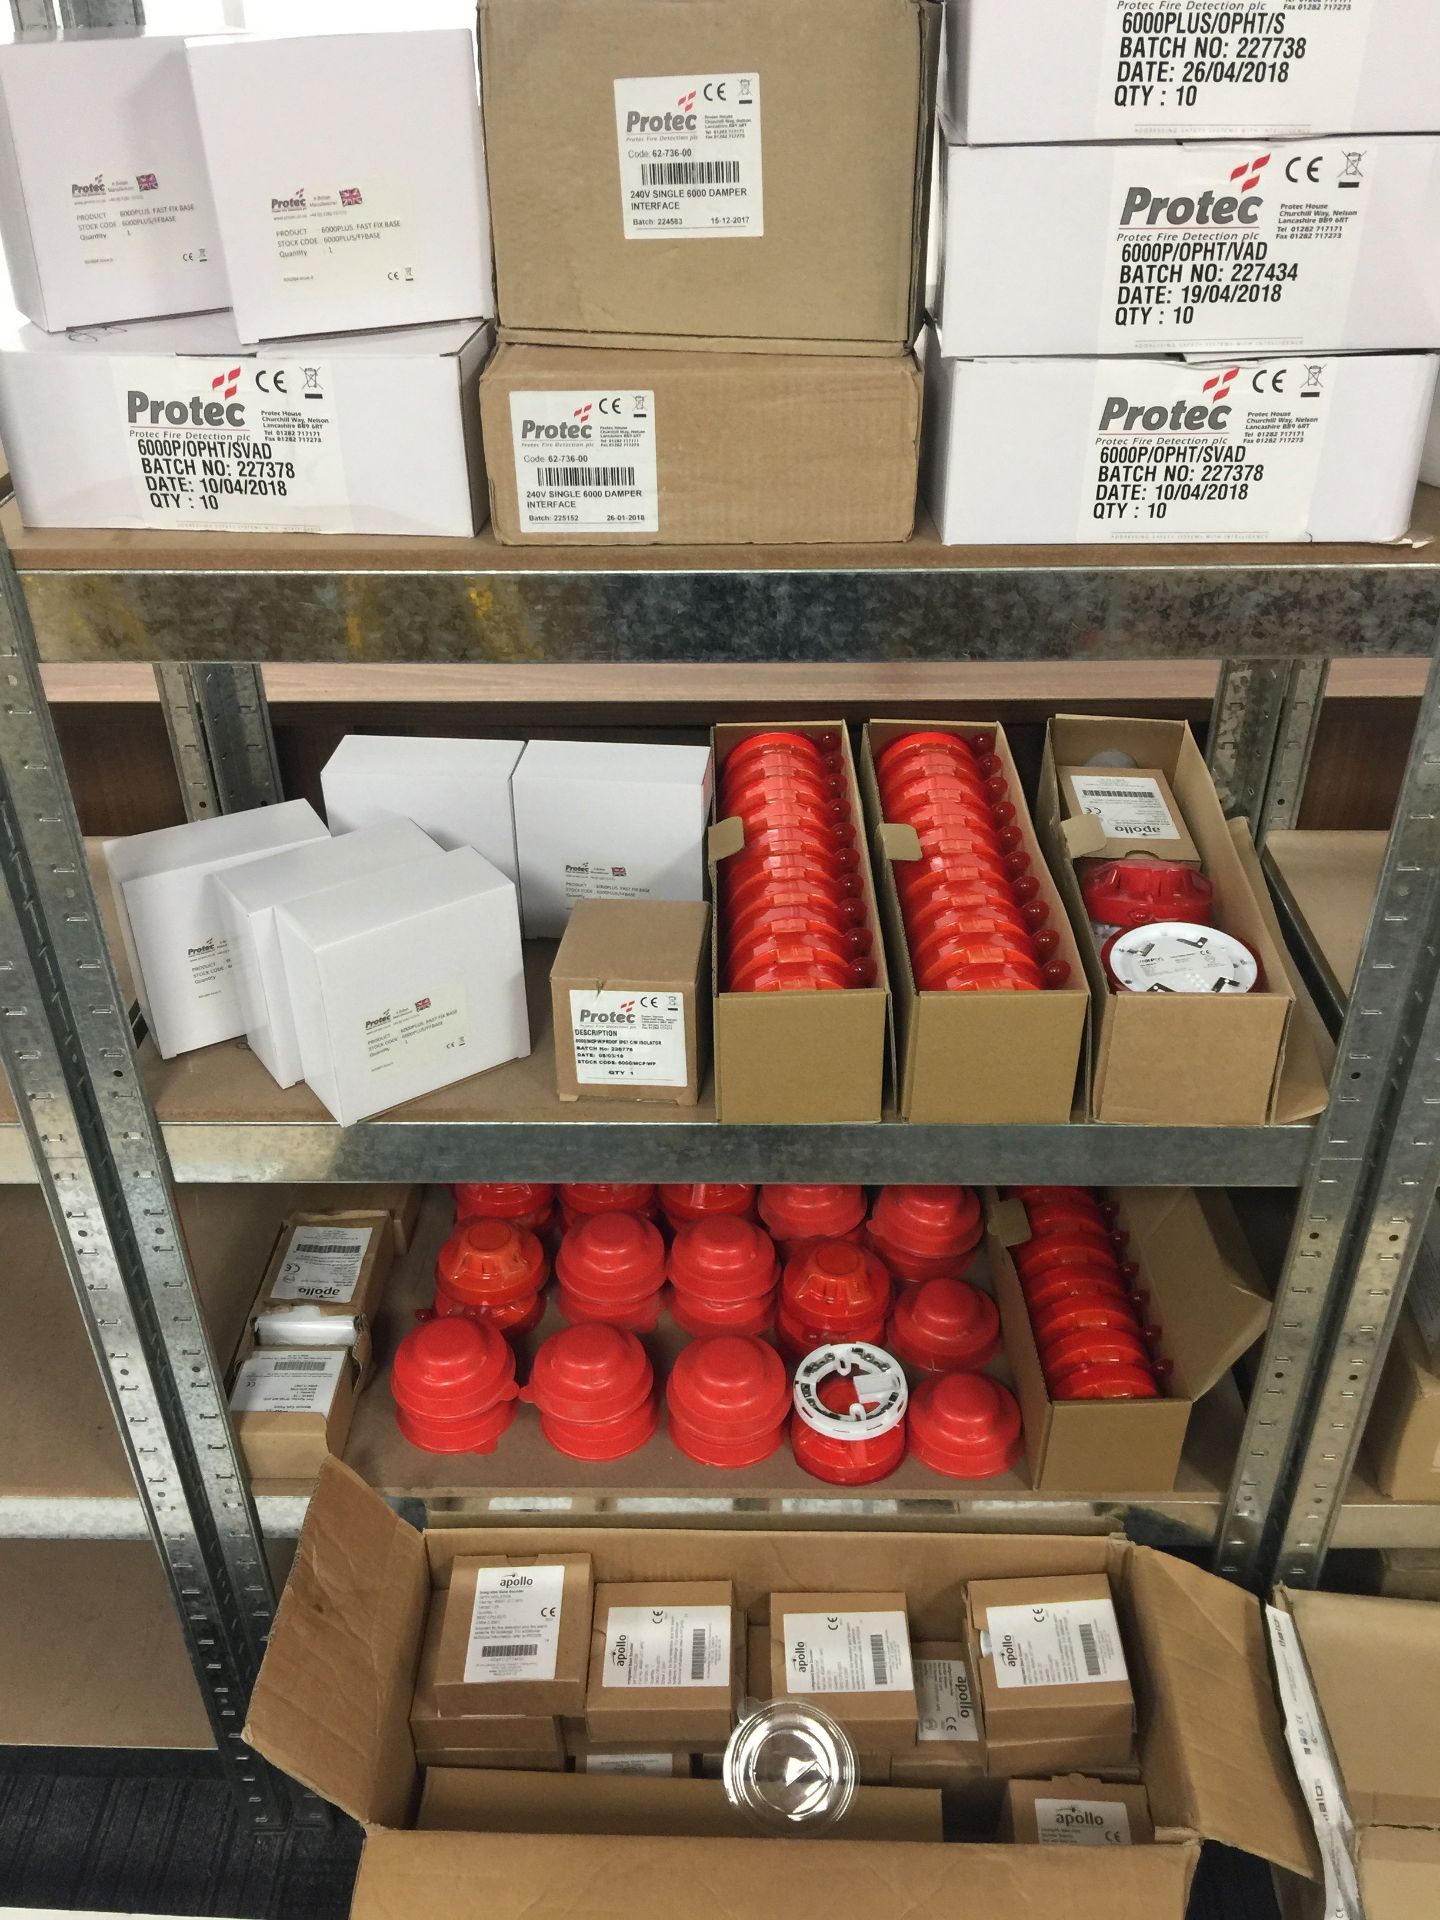 Large quantity of Protec fire and alarm related fittings as per photos